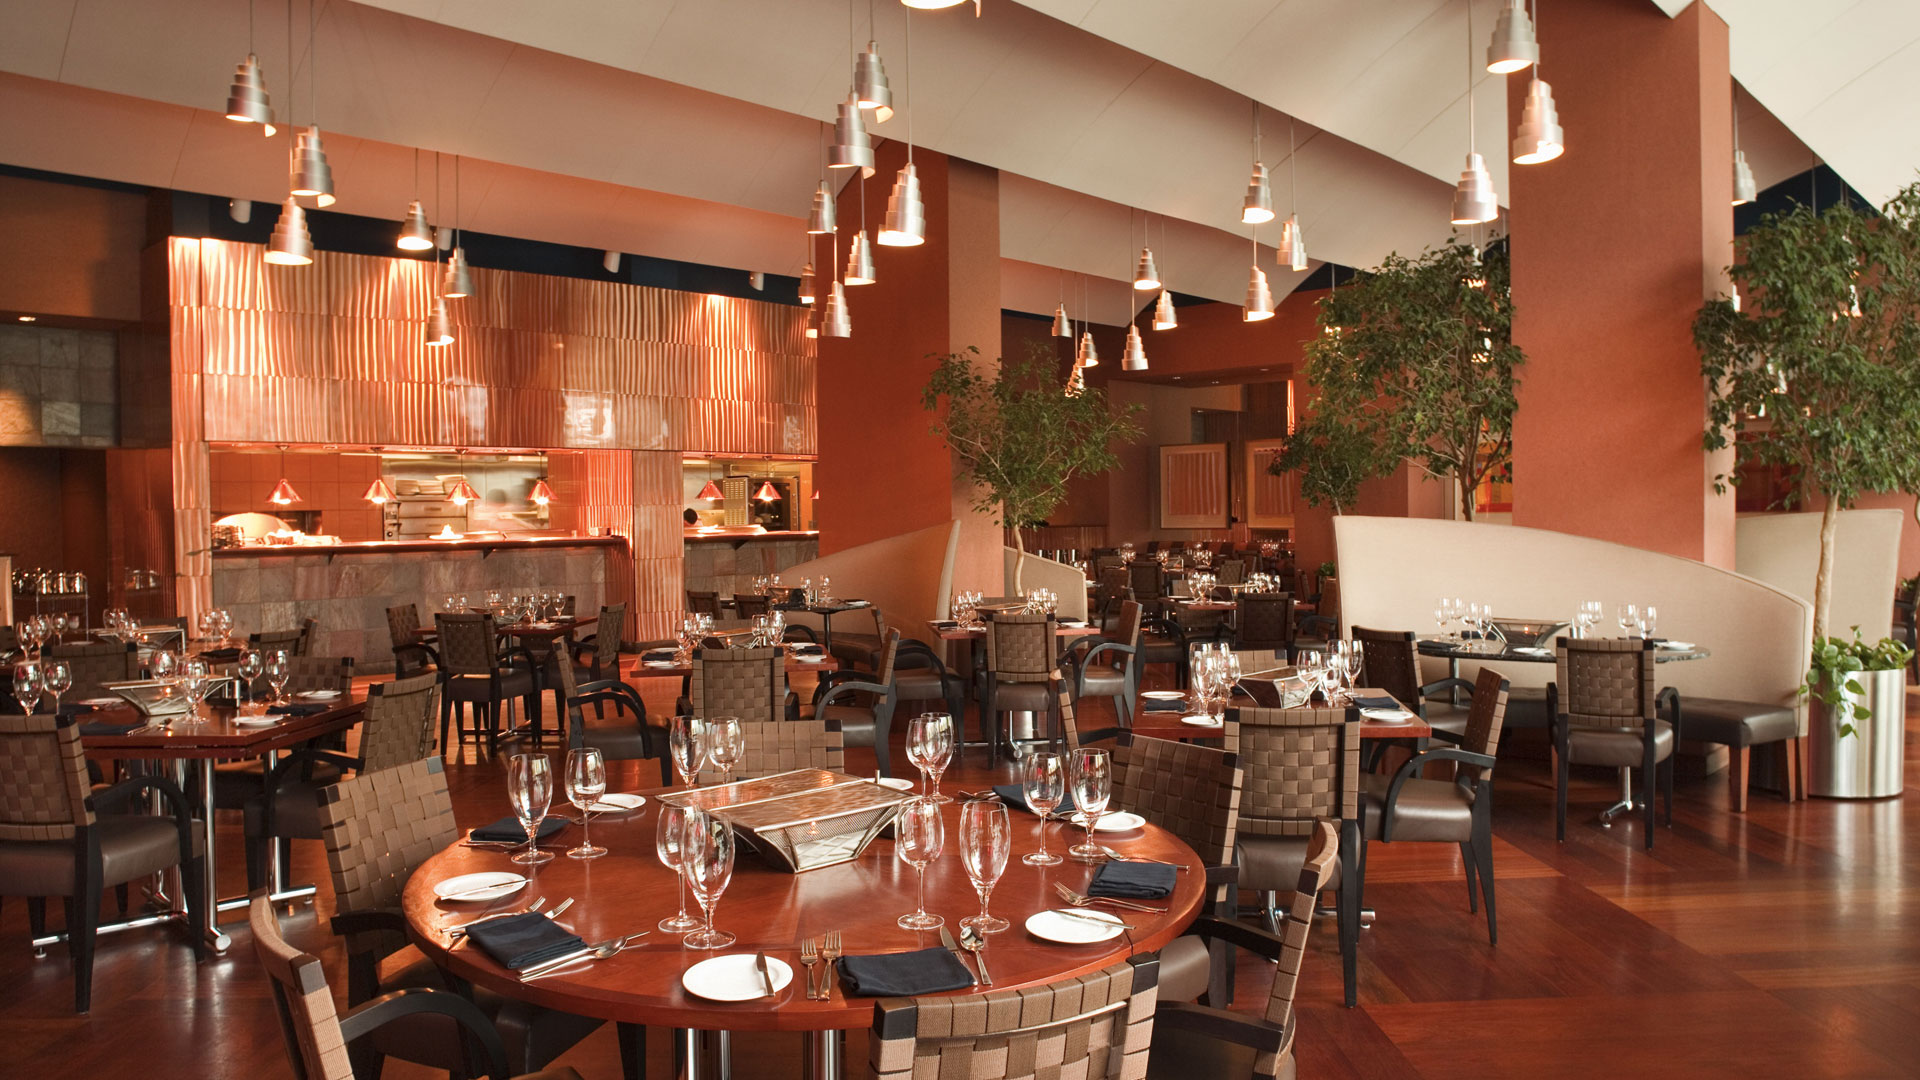 San Diego and Southern California Retail and Restaurant Interior Design